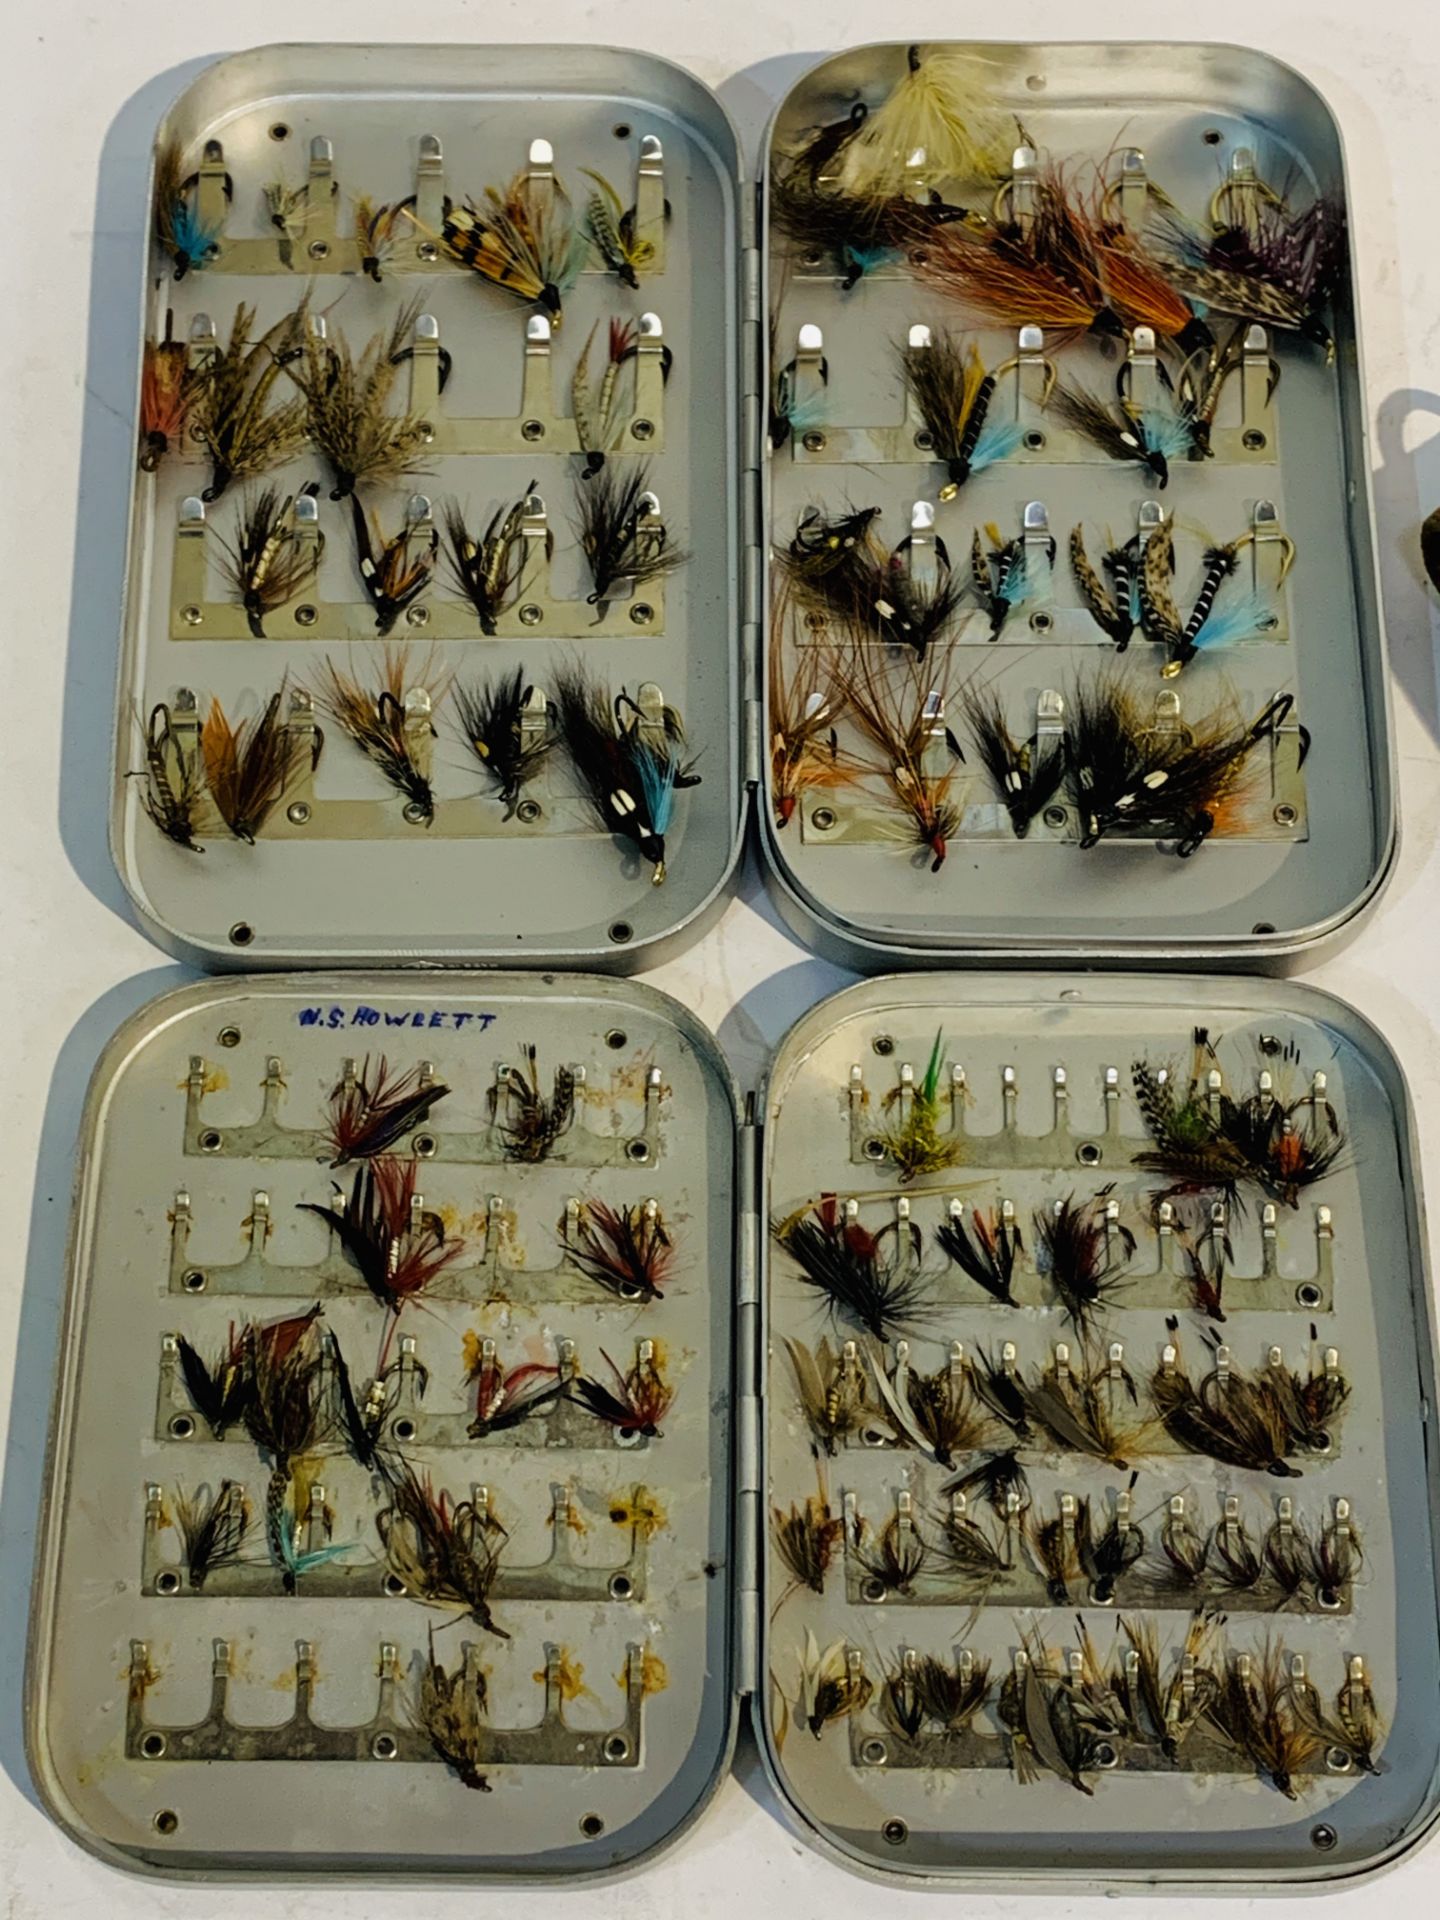 Two cases of fly fishing flies together with a Jackson's cast book. - Image 2 of 2